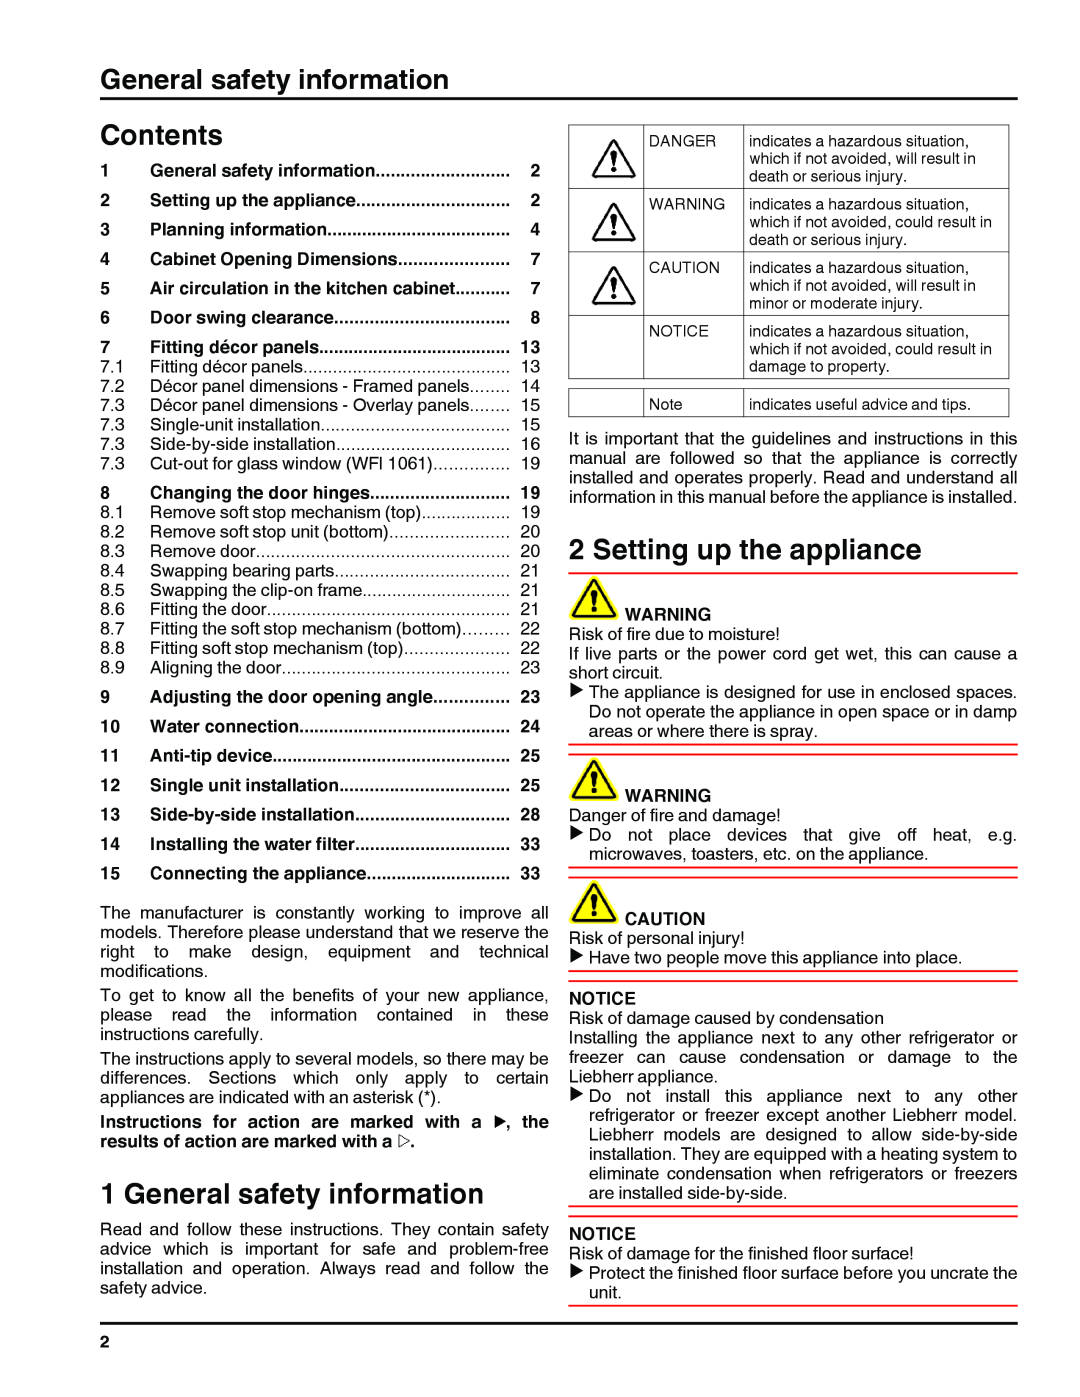 Liebherr RI 1410/ RBI 1410/ FI 1051 manual General safety information, Contents, Setting up the appliance 